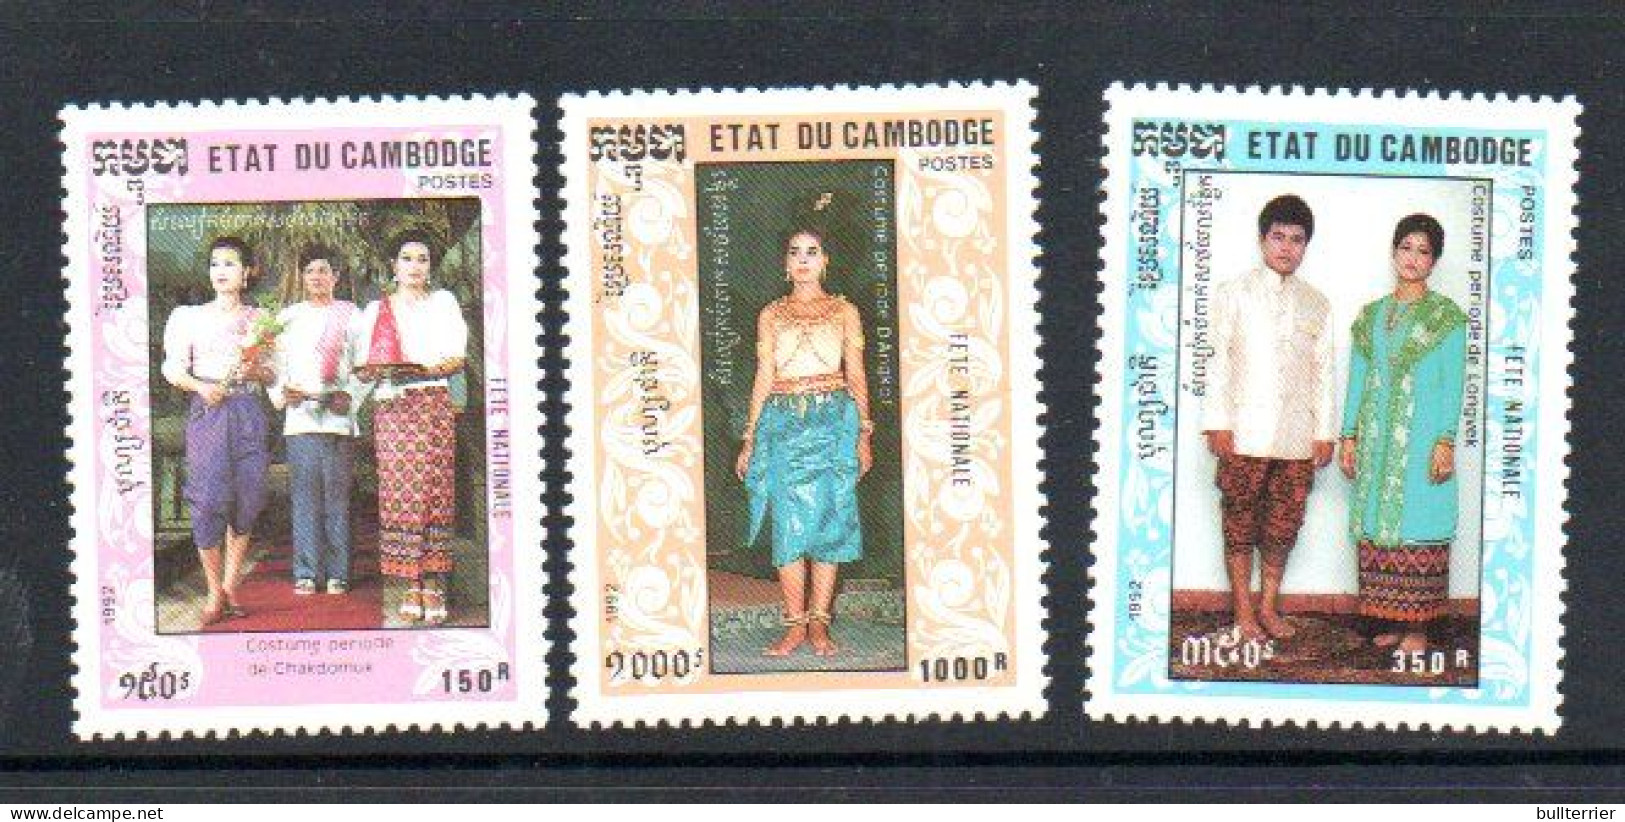 CAMBODIA - 1992- TRADITIONAL COSTUMES SET OF 3  MINT NEVER HINGED - Cambodia